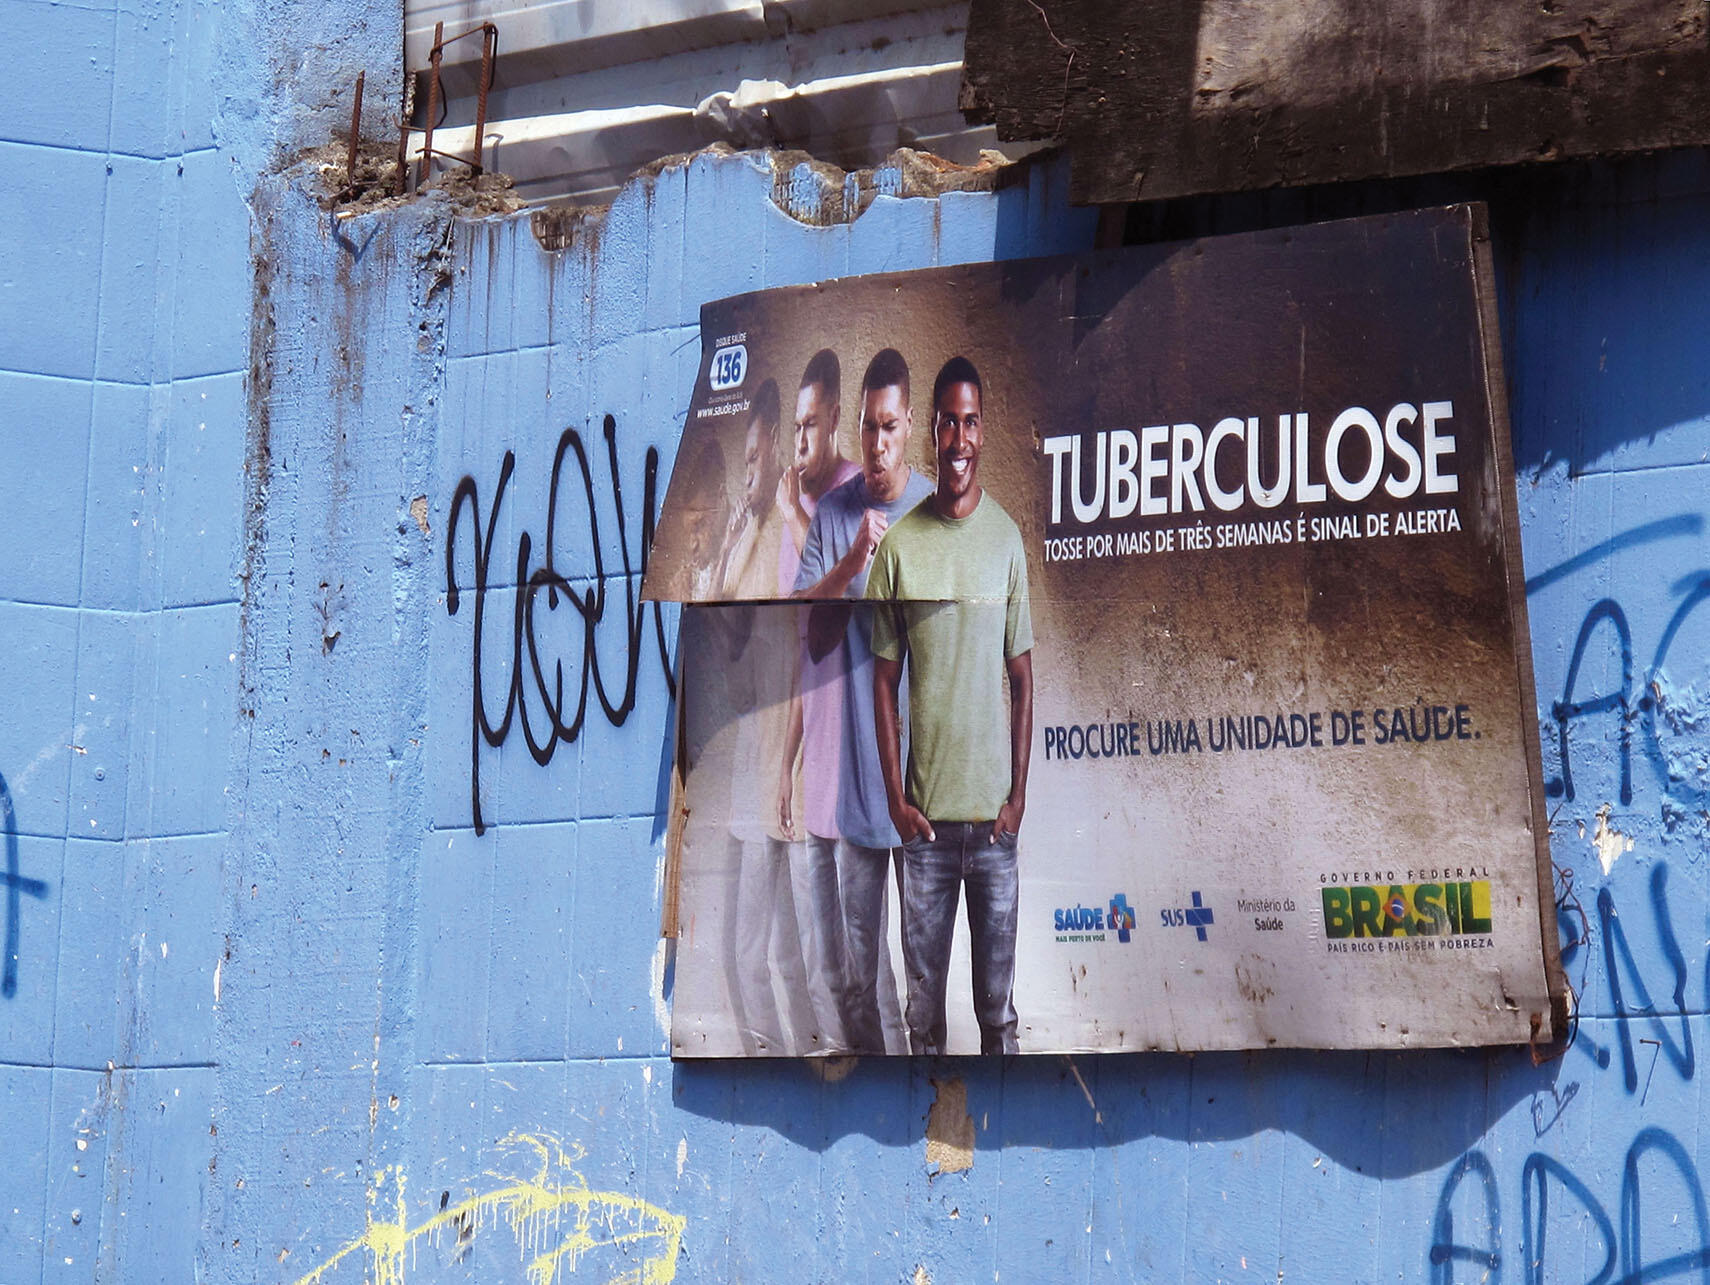 A billboard in the Rocinha favela of Rio de Janeiro warns that coughing for more than three weeks could be a symptom of tuberculosis. (Photo by Adam Greenfield.)